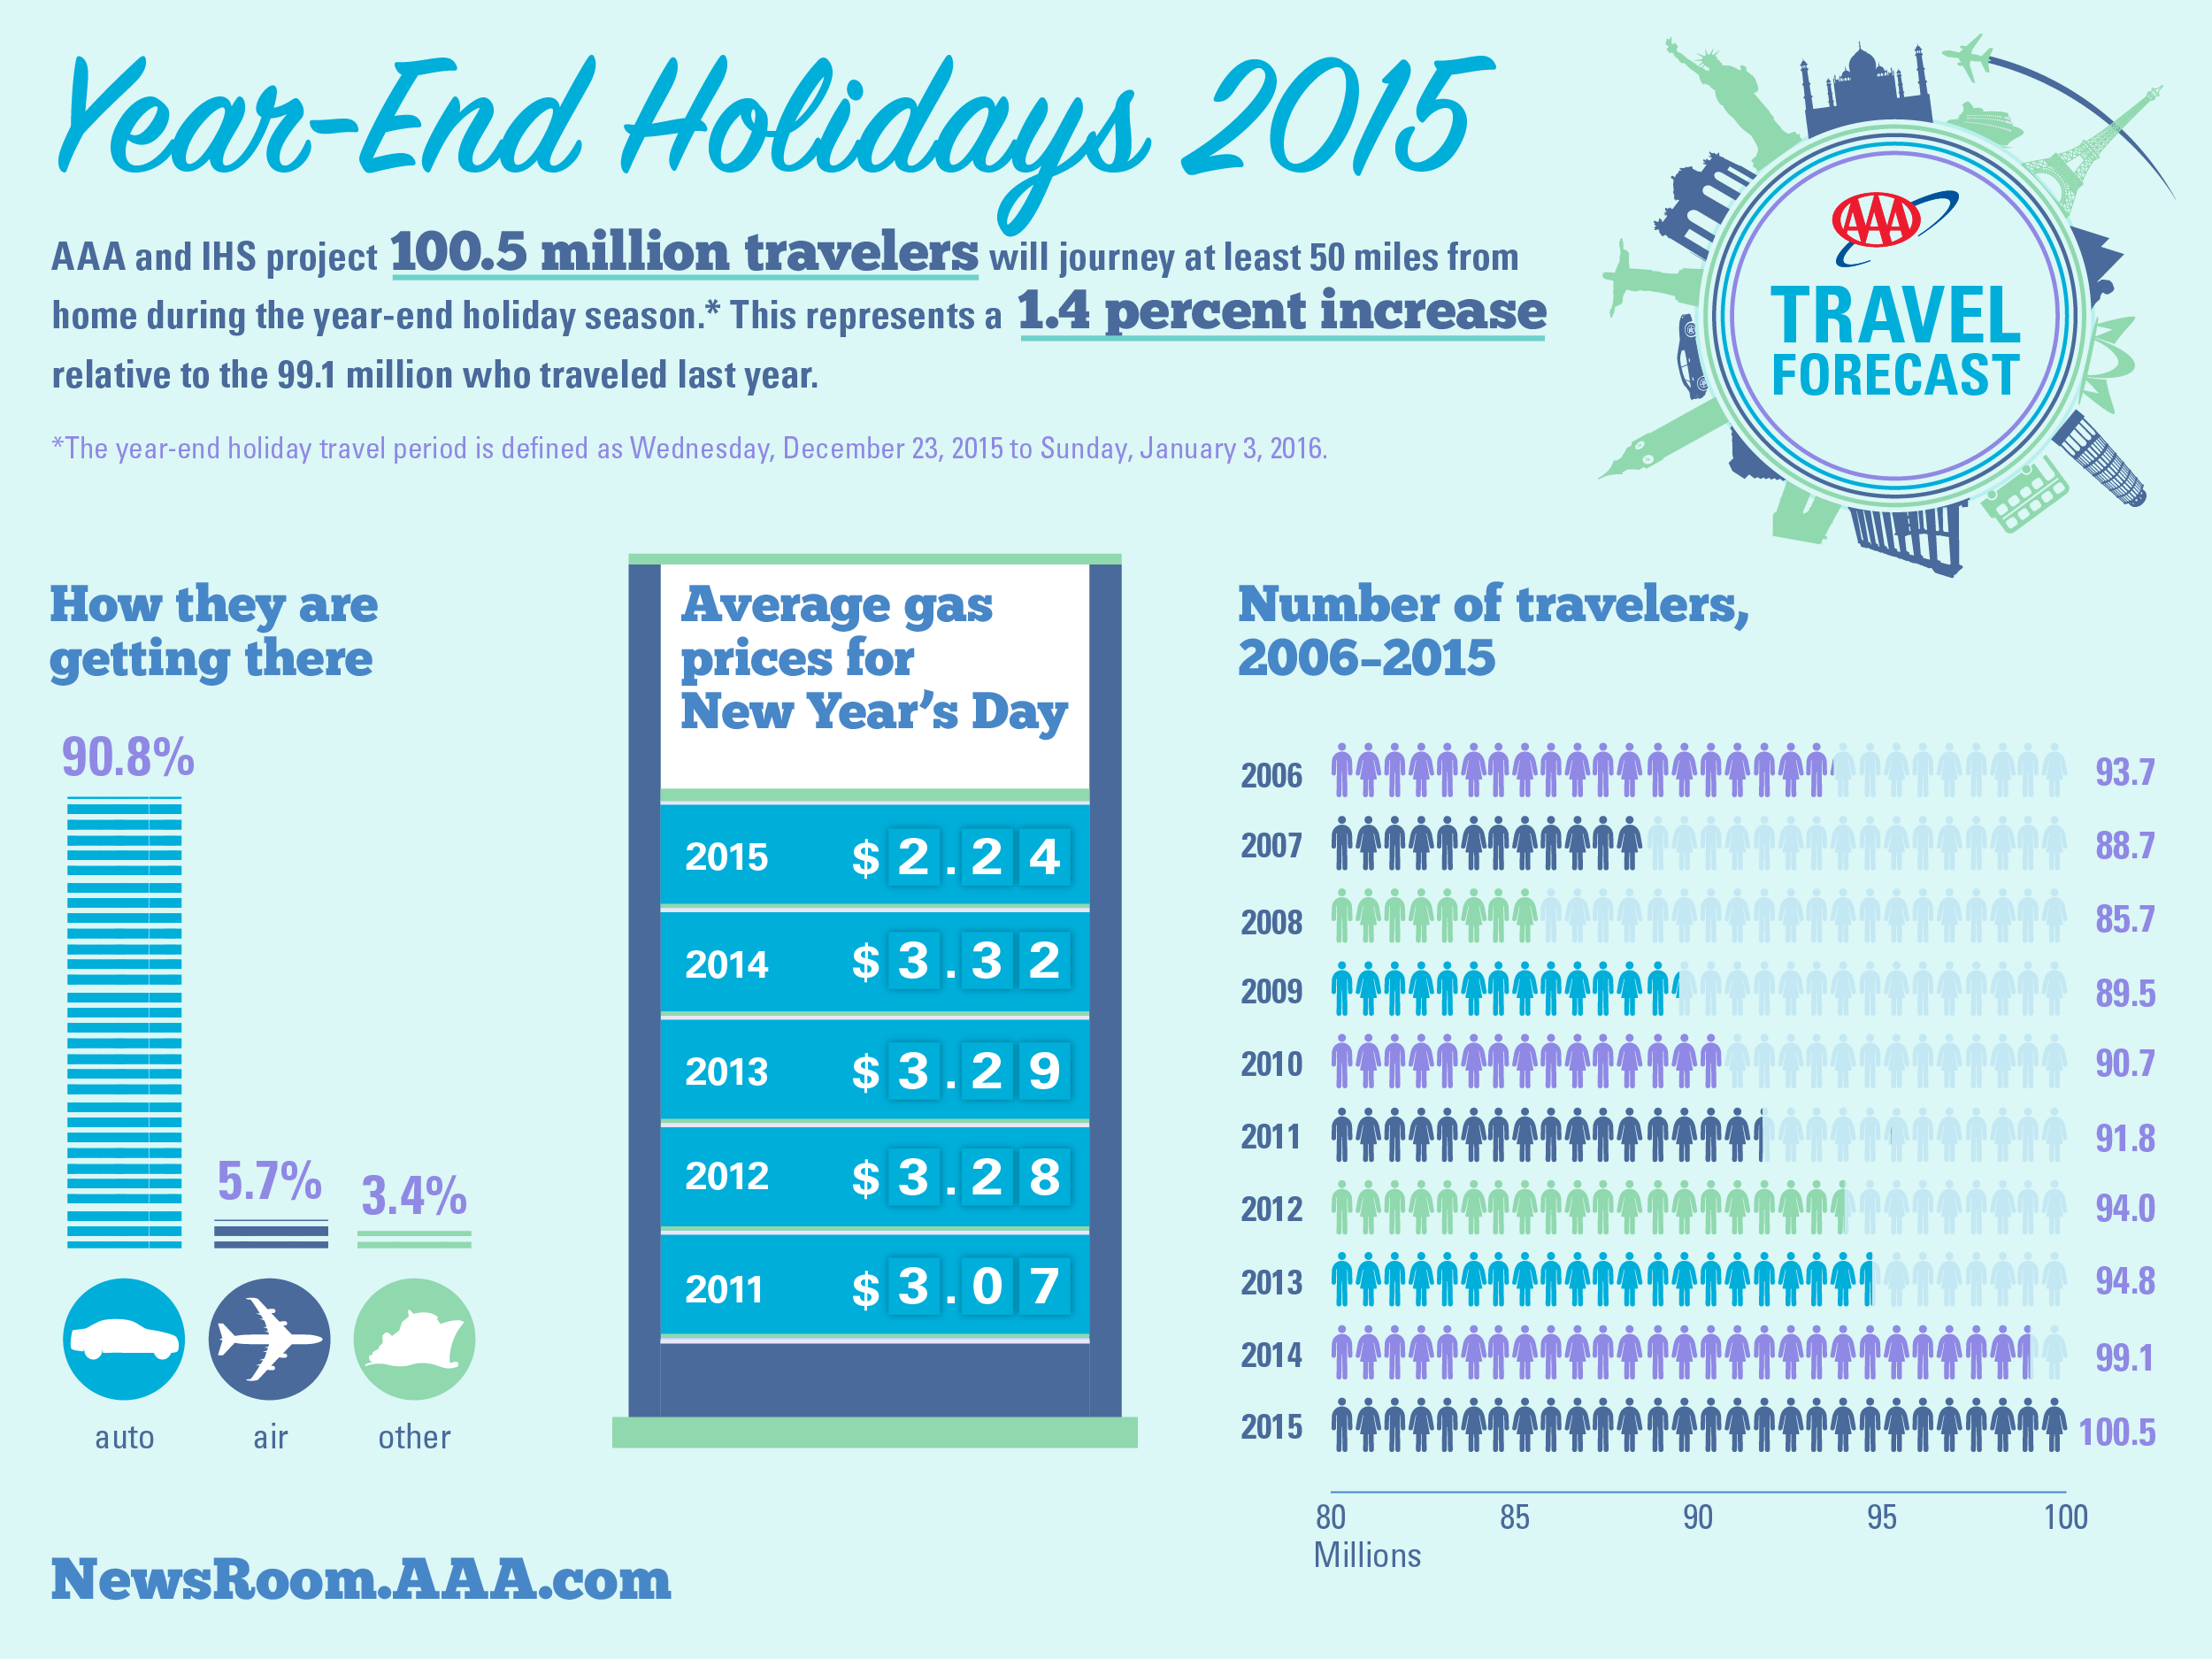 Infographic source: AAA (http://newsroom.aaa.com/wp-content/uploads/2015/12/2015-Year-End-Travel-Forecast.png )